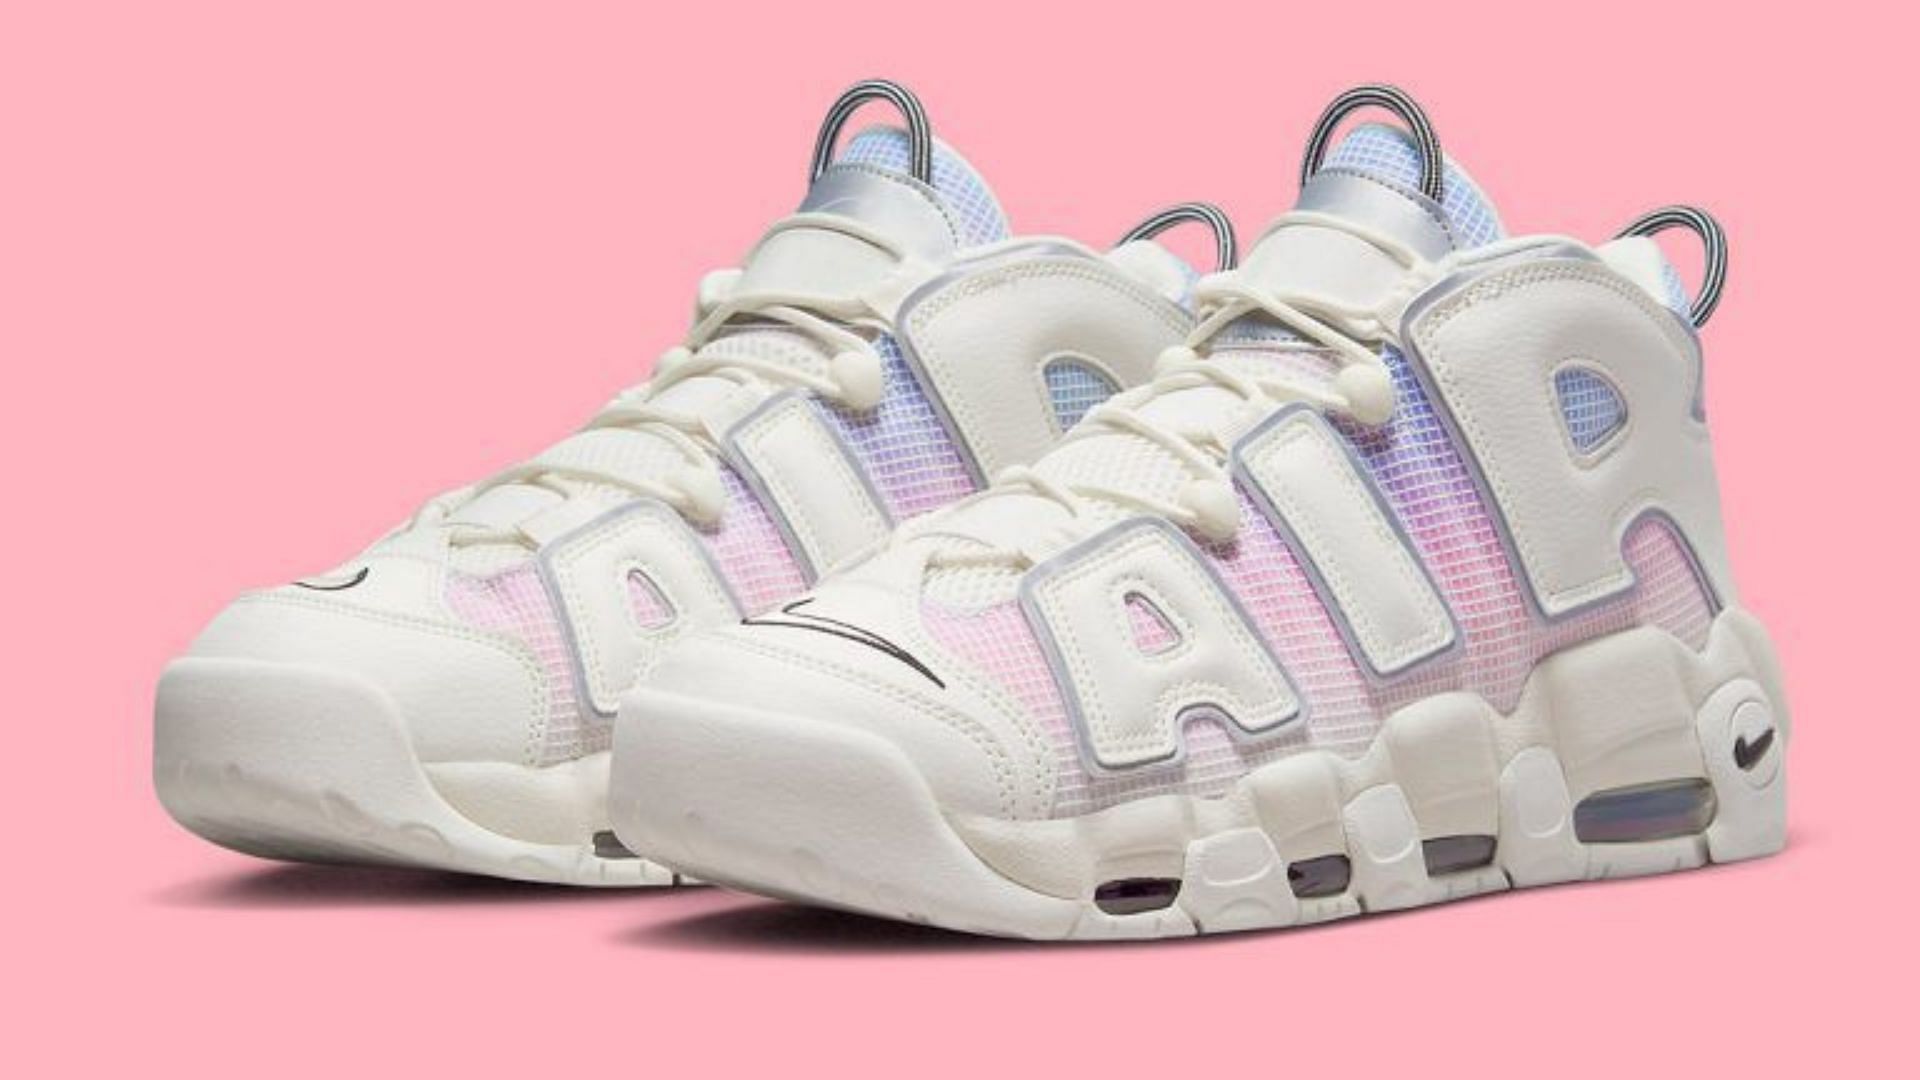 Where to buy Air More Uptempo You, Wilson” shoes? Price, release date, more details explored